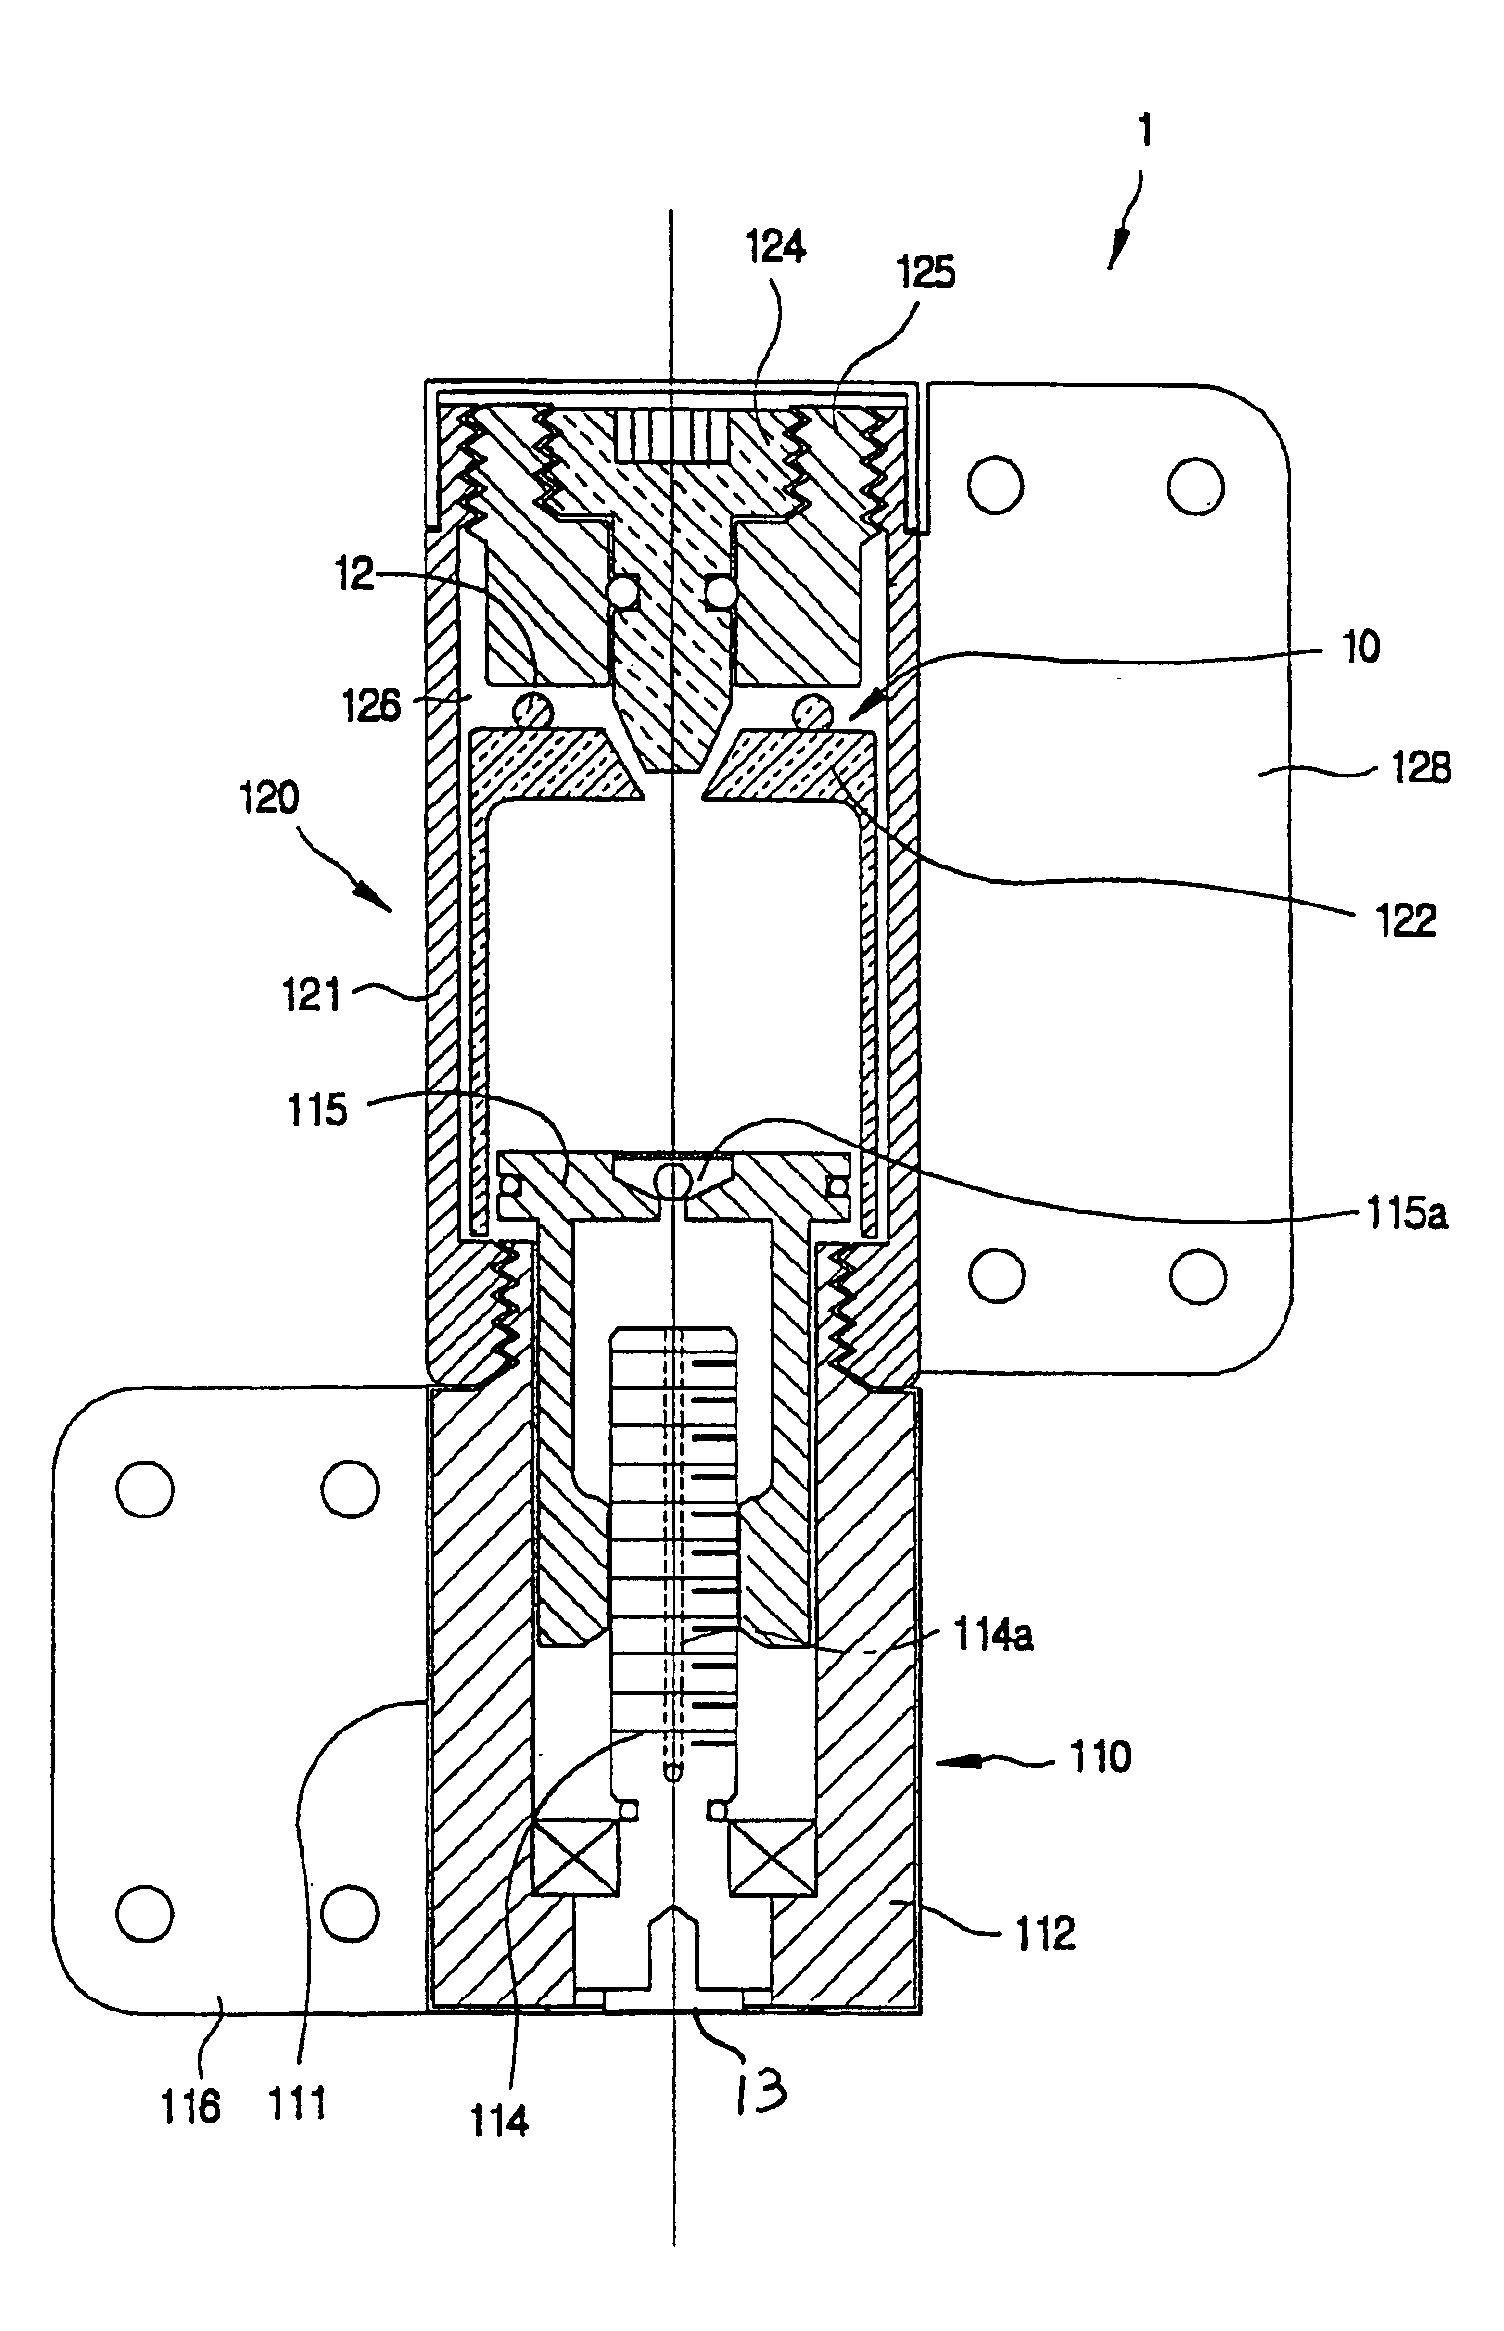 Apparatus for opening and closing door